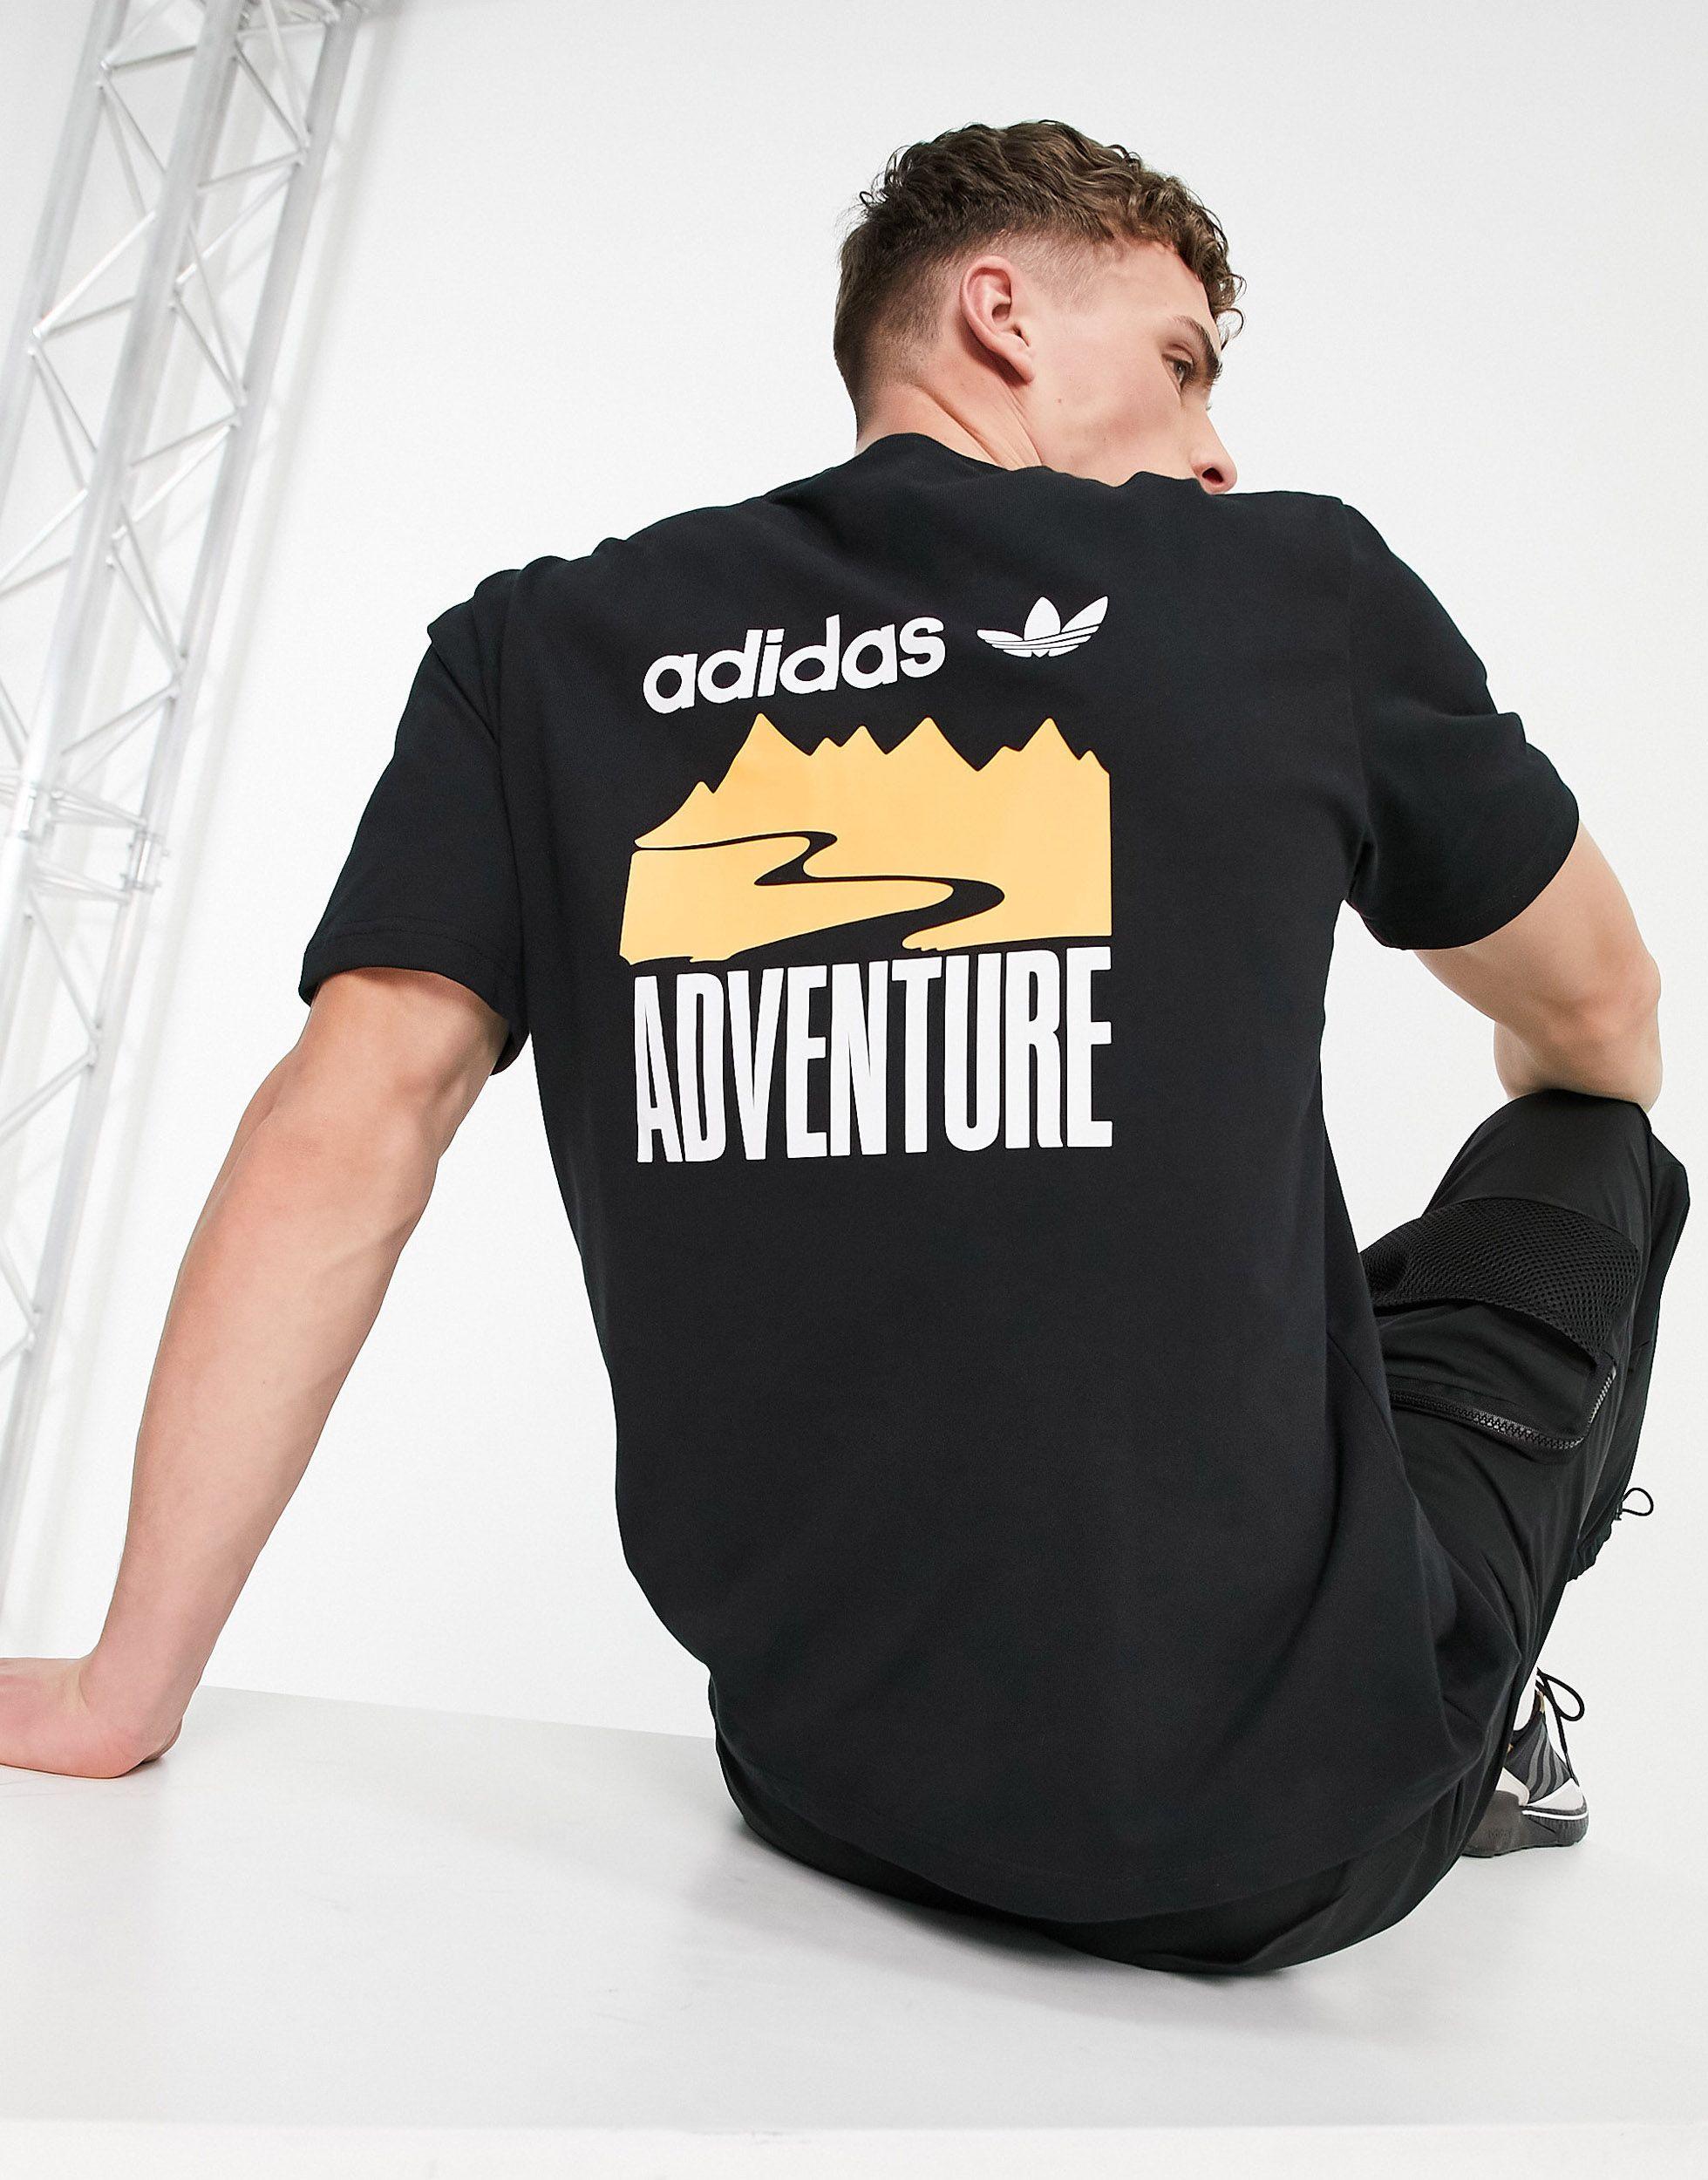 adidas Originals Adventure T-shirt With Back Print in Black for Men | Lyst